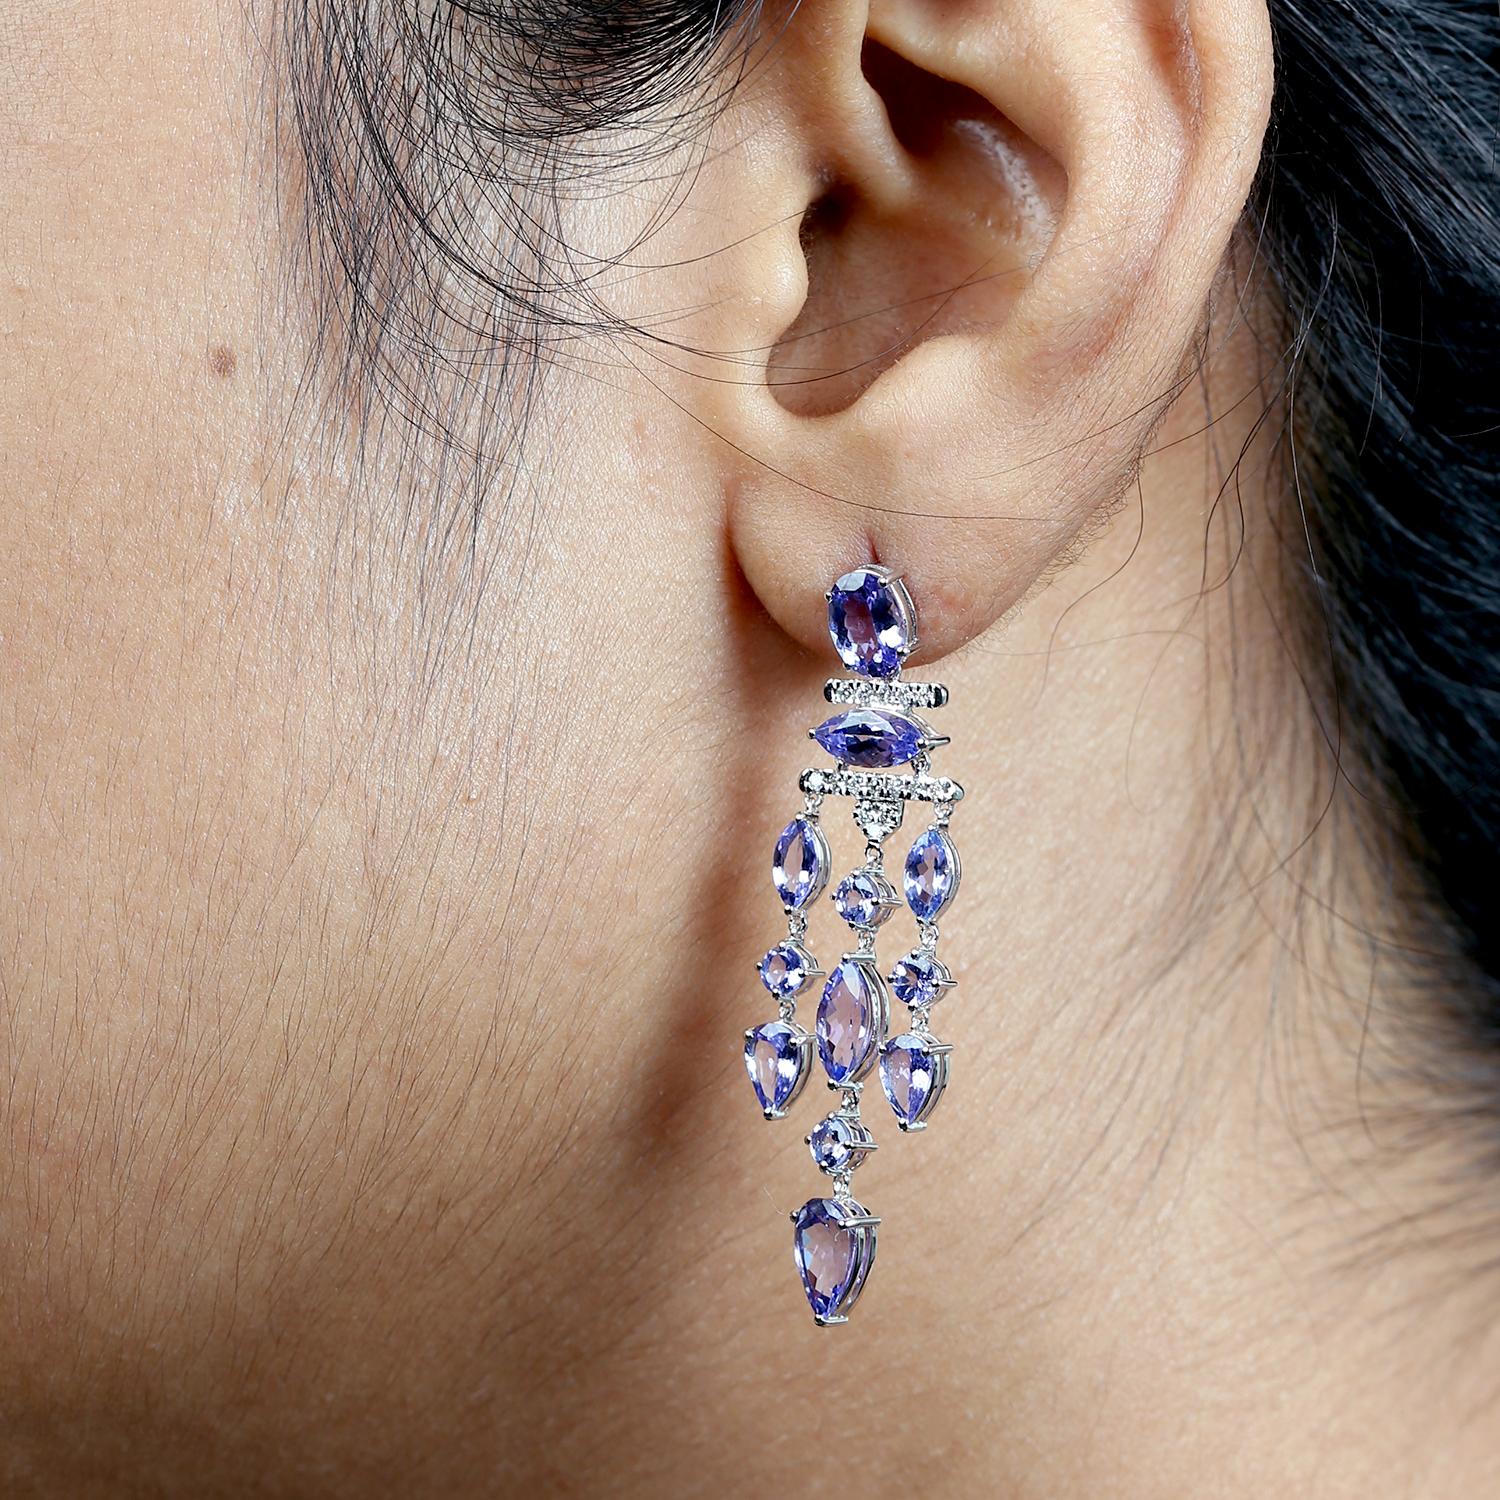 Art Deco Multishaped Tanzanite Waterfall Earrings With Diamonds Made In 18k Gold For Sale